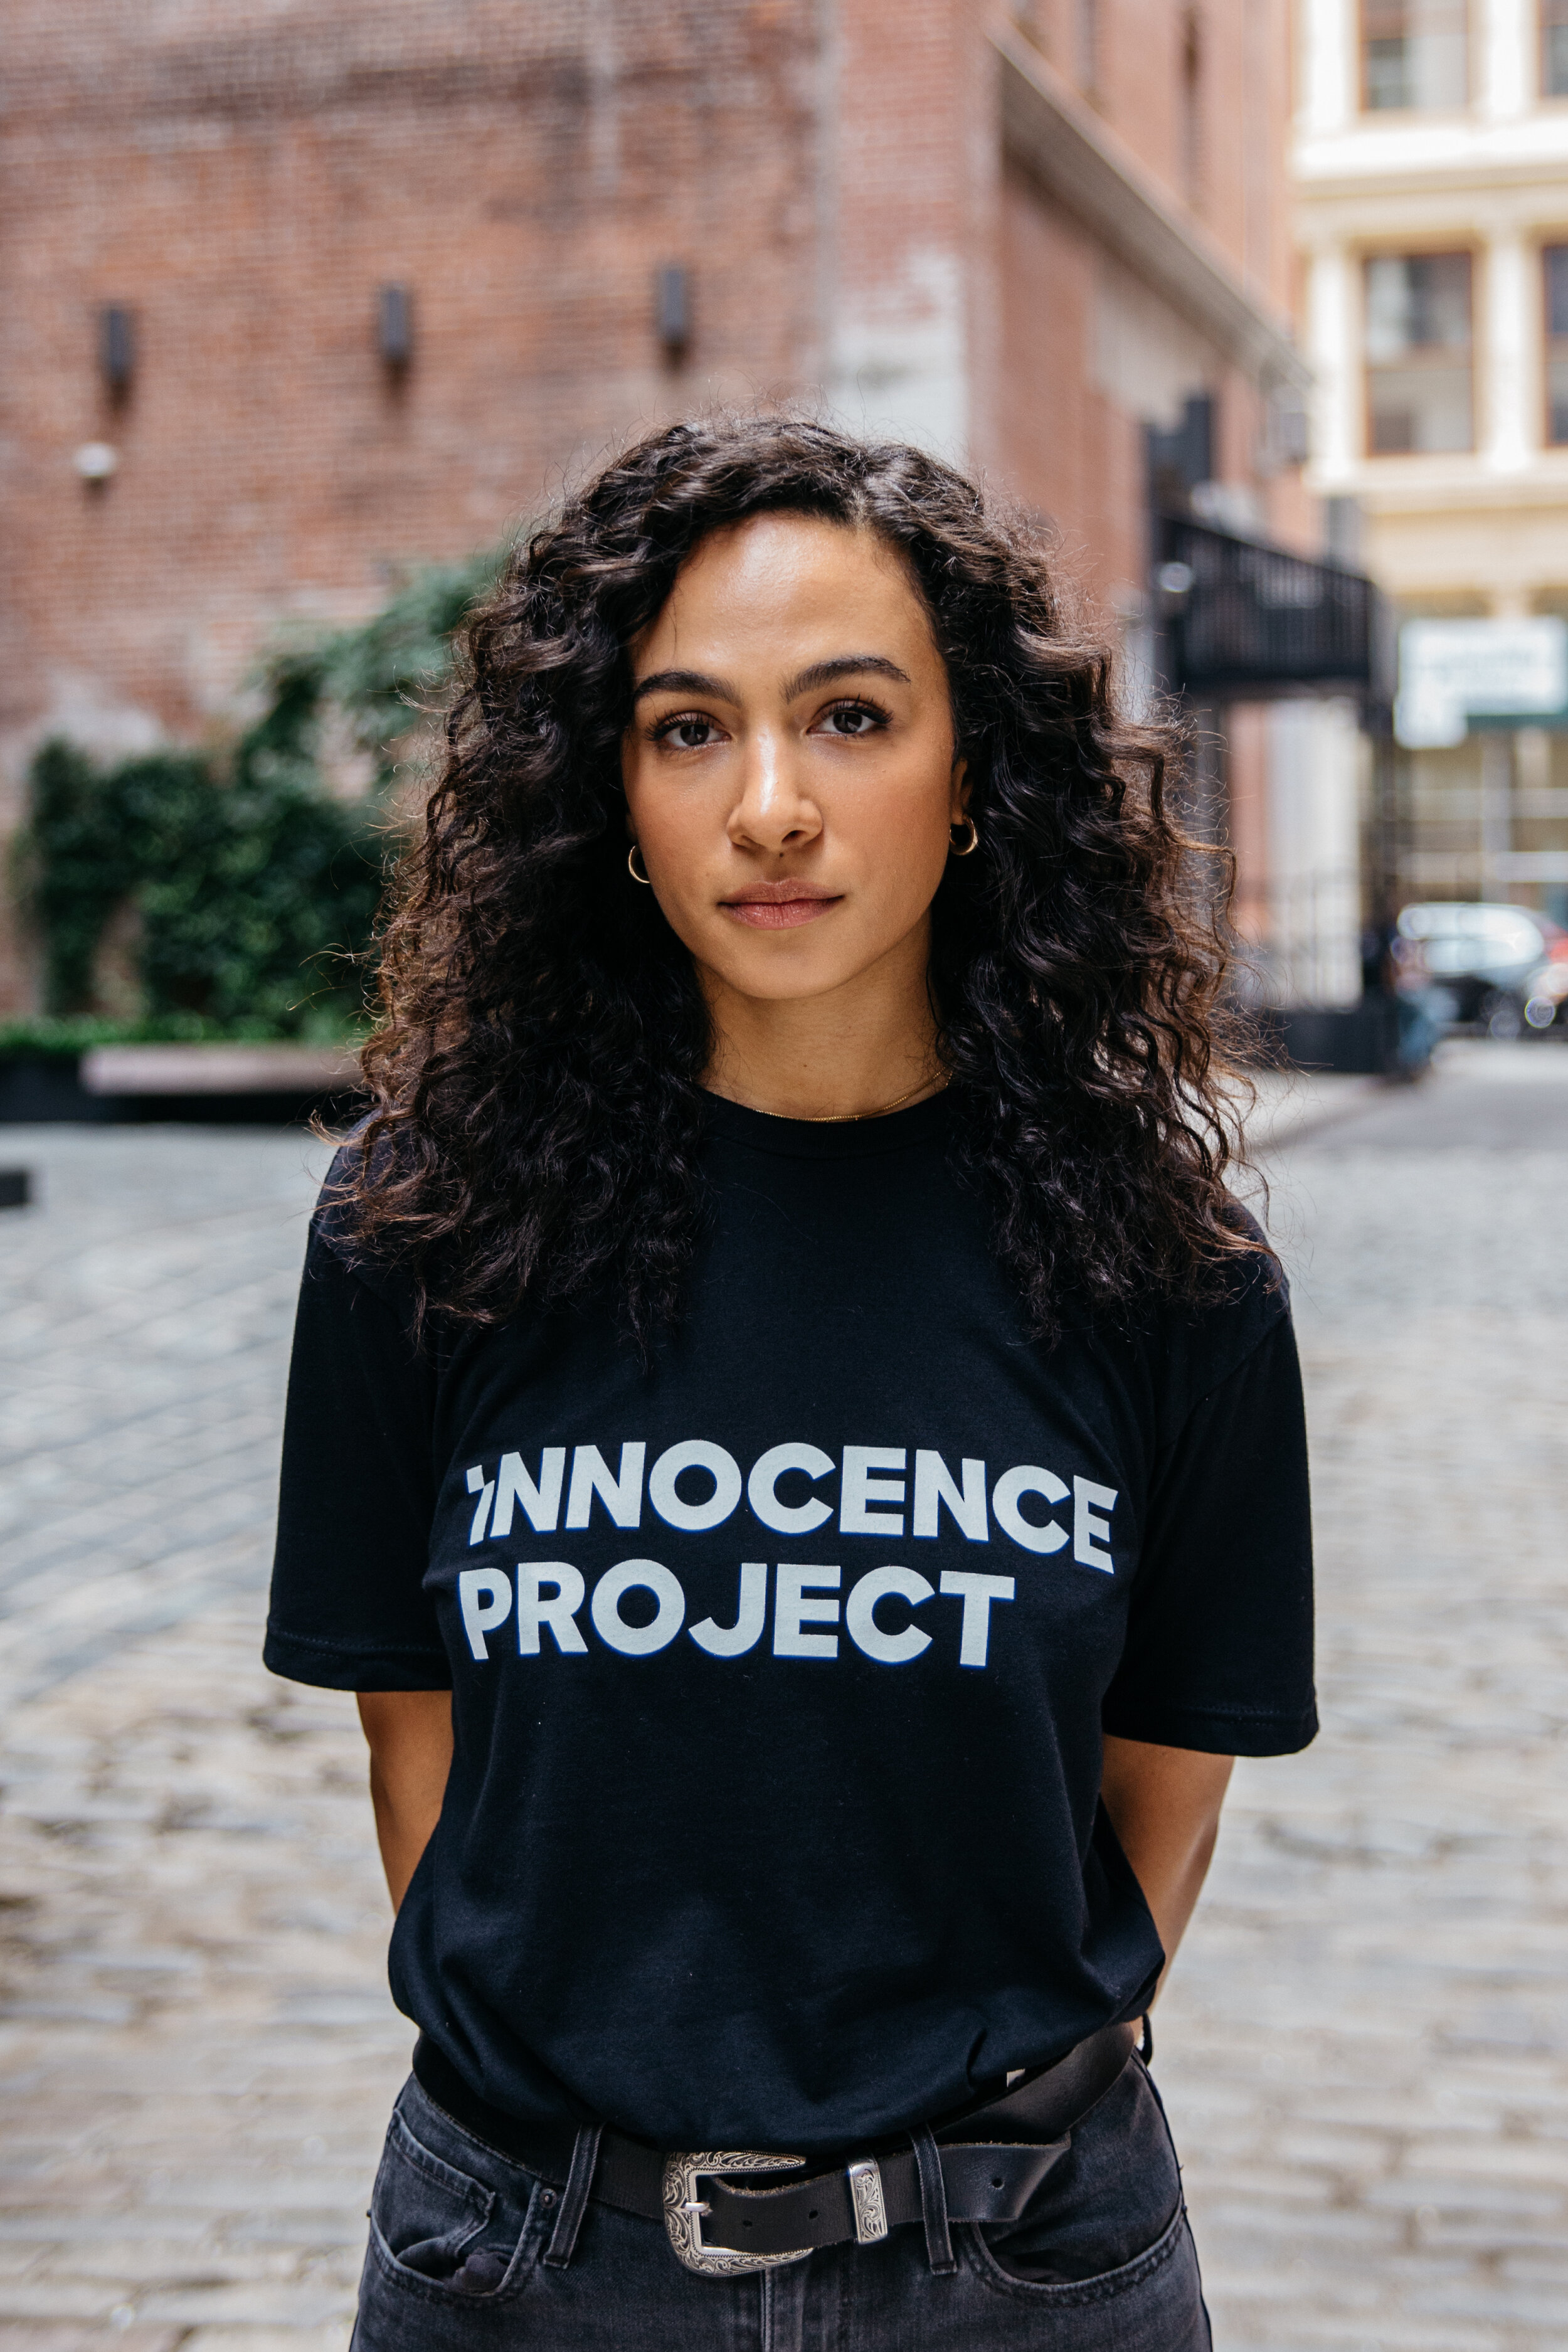  Aurora Perrineau wearing a black Innocence Project t-shirt, a part of the Wrongful Conviction Day campaign.  